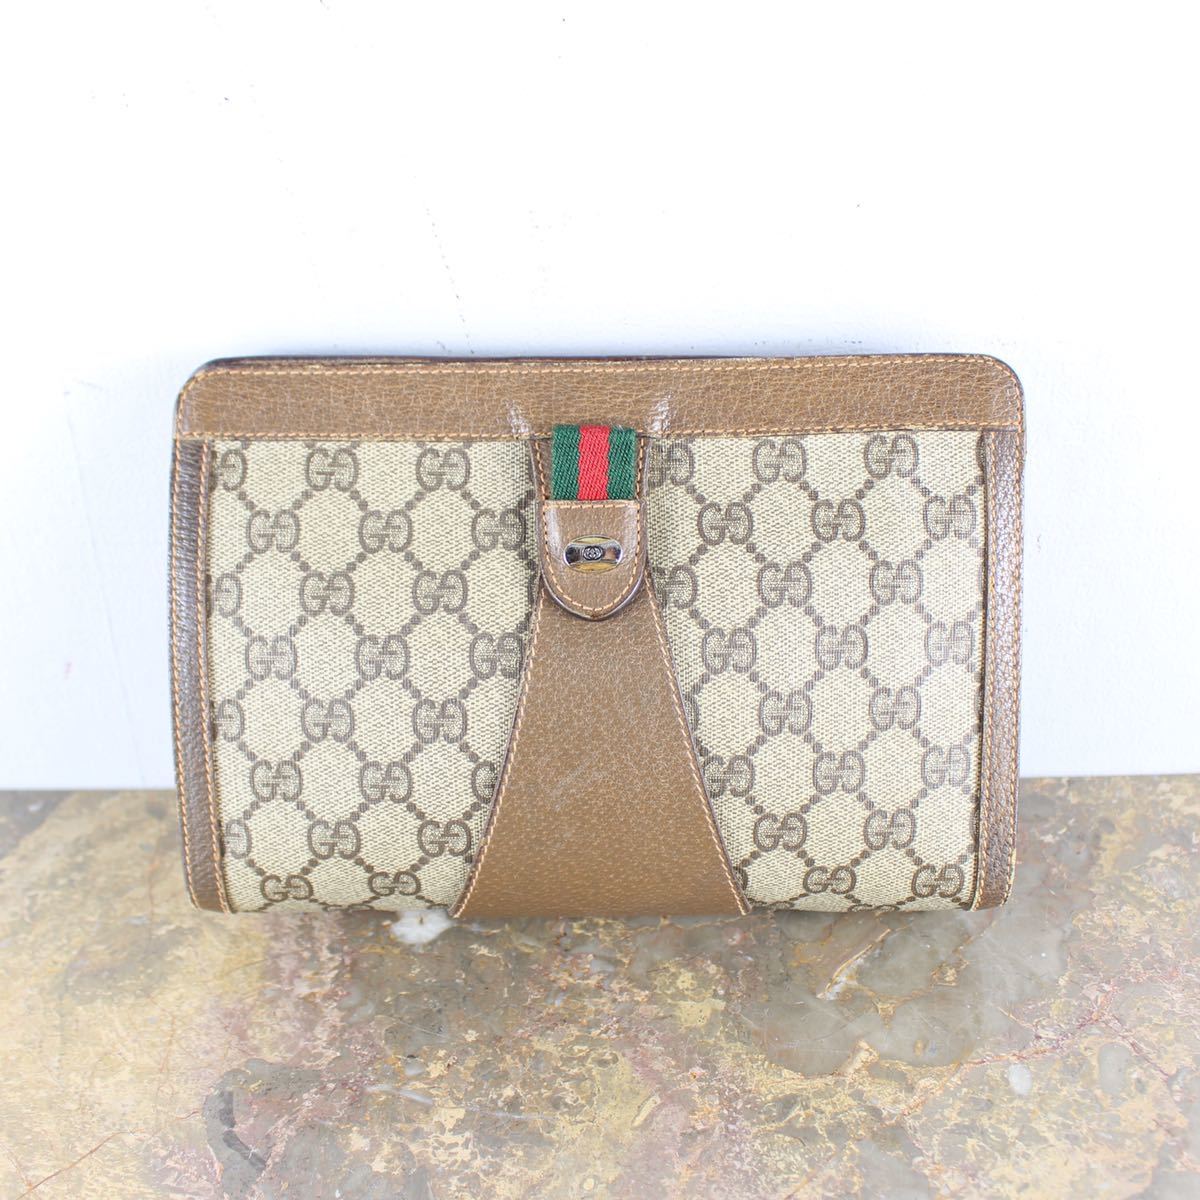 OLD GUCCI SHERRY LINE GG PATTERNED CLUTCH BAG MADE IN ITALY/オールドグッチシェリーラインGG 柄クラッチバッグ